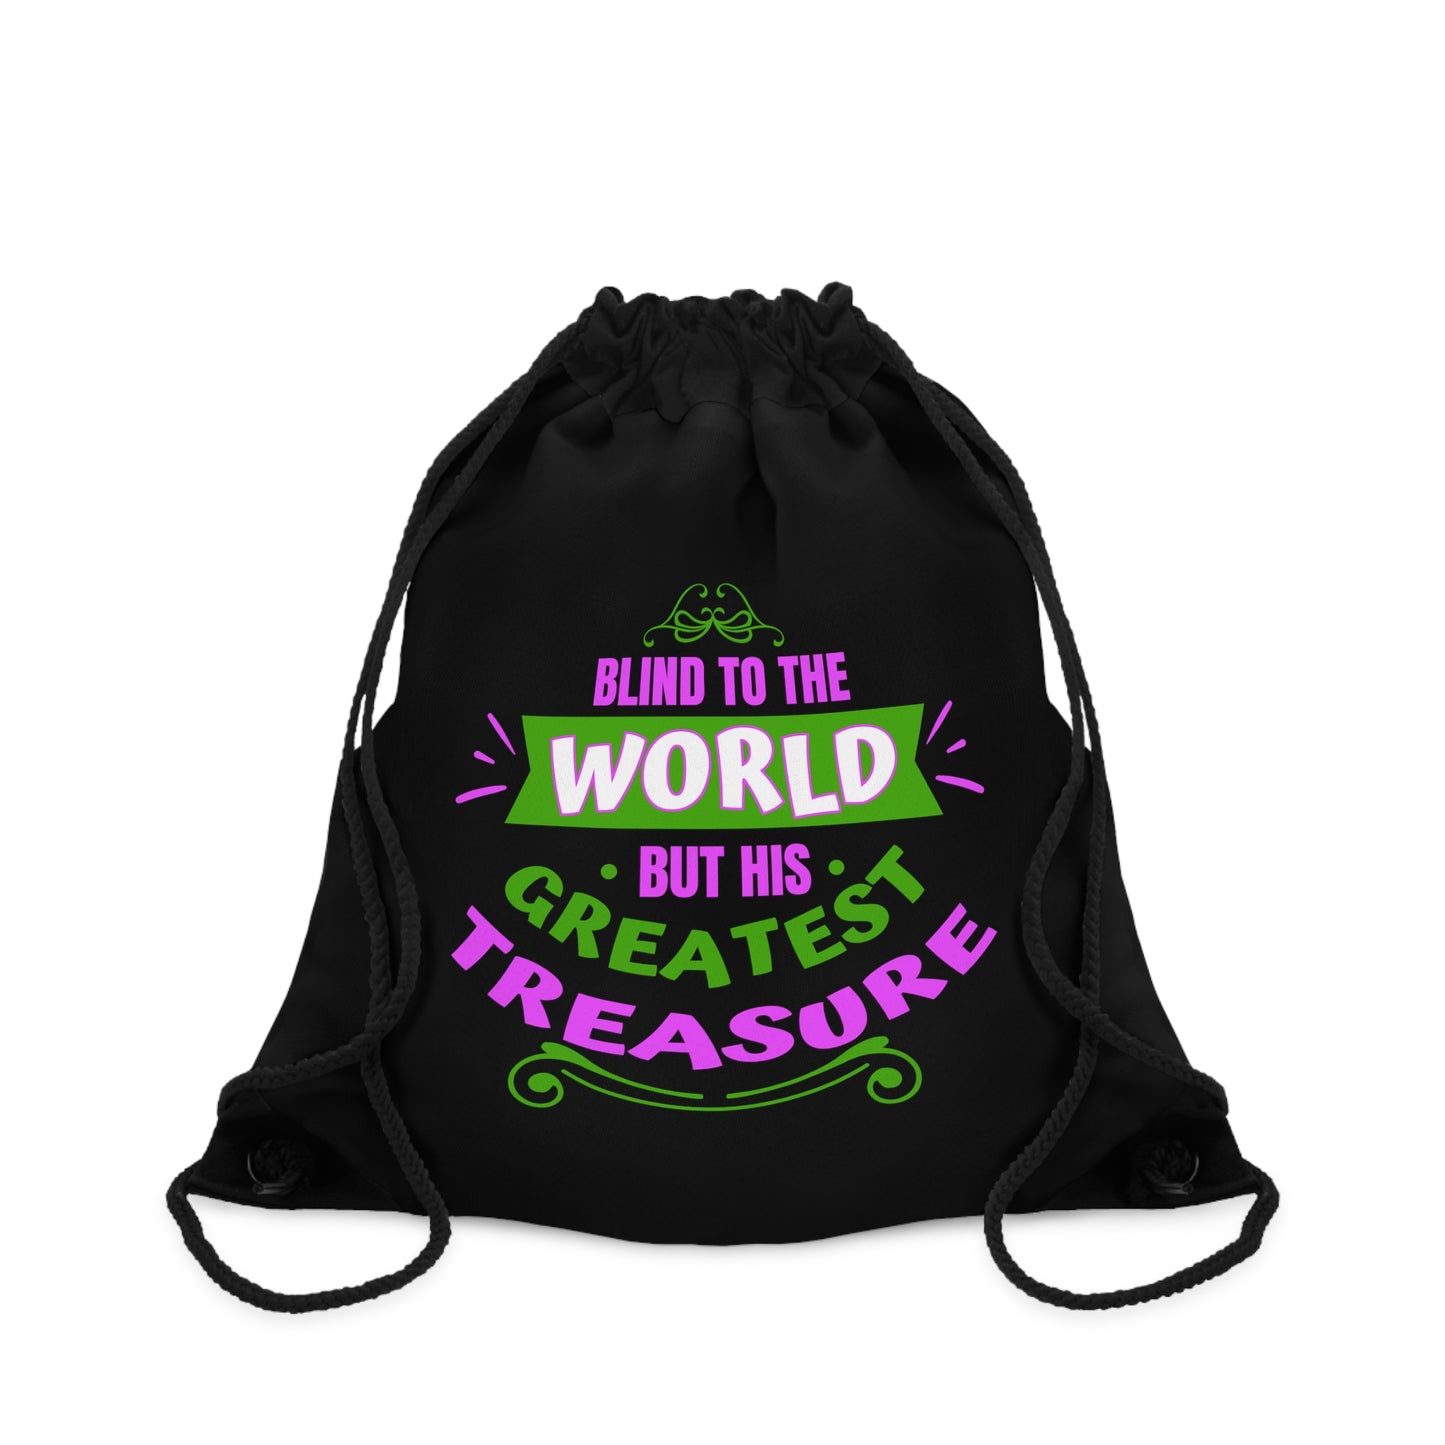 Blind To The World But His Greatest Treasure Drawstring Bag